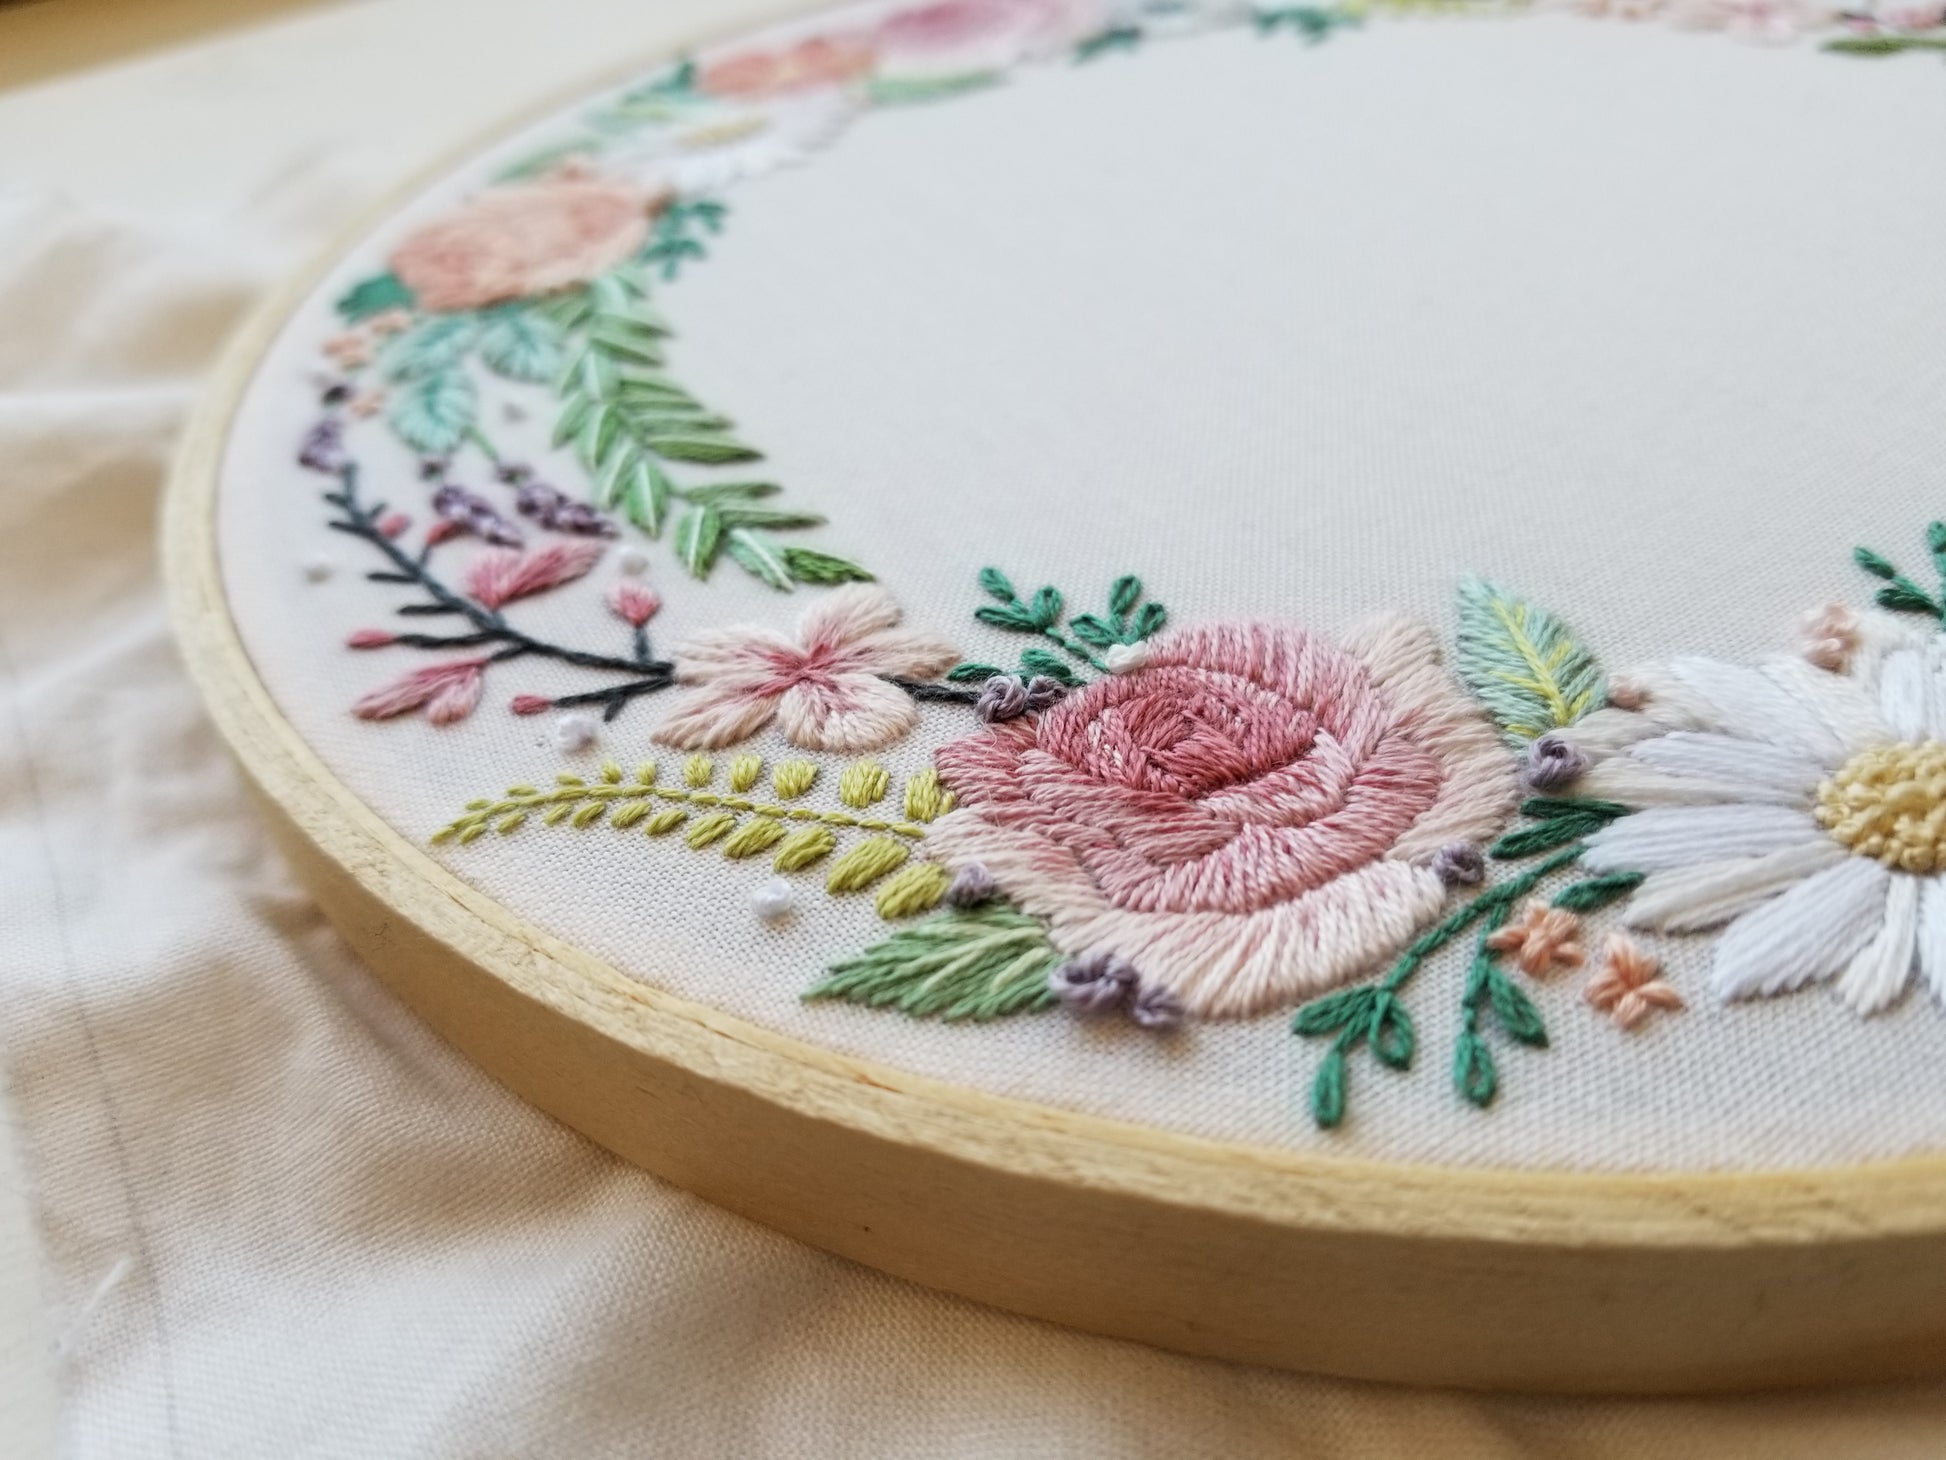 Floral Harvest Embroidery Pattern (PDF) – Jessica Long Embroidery